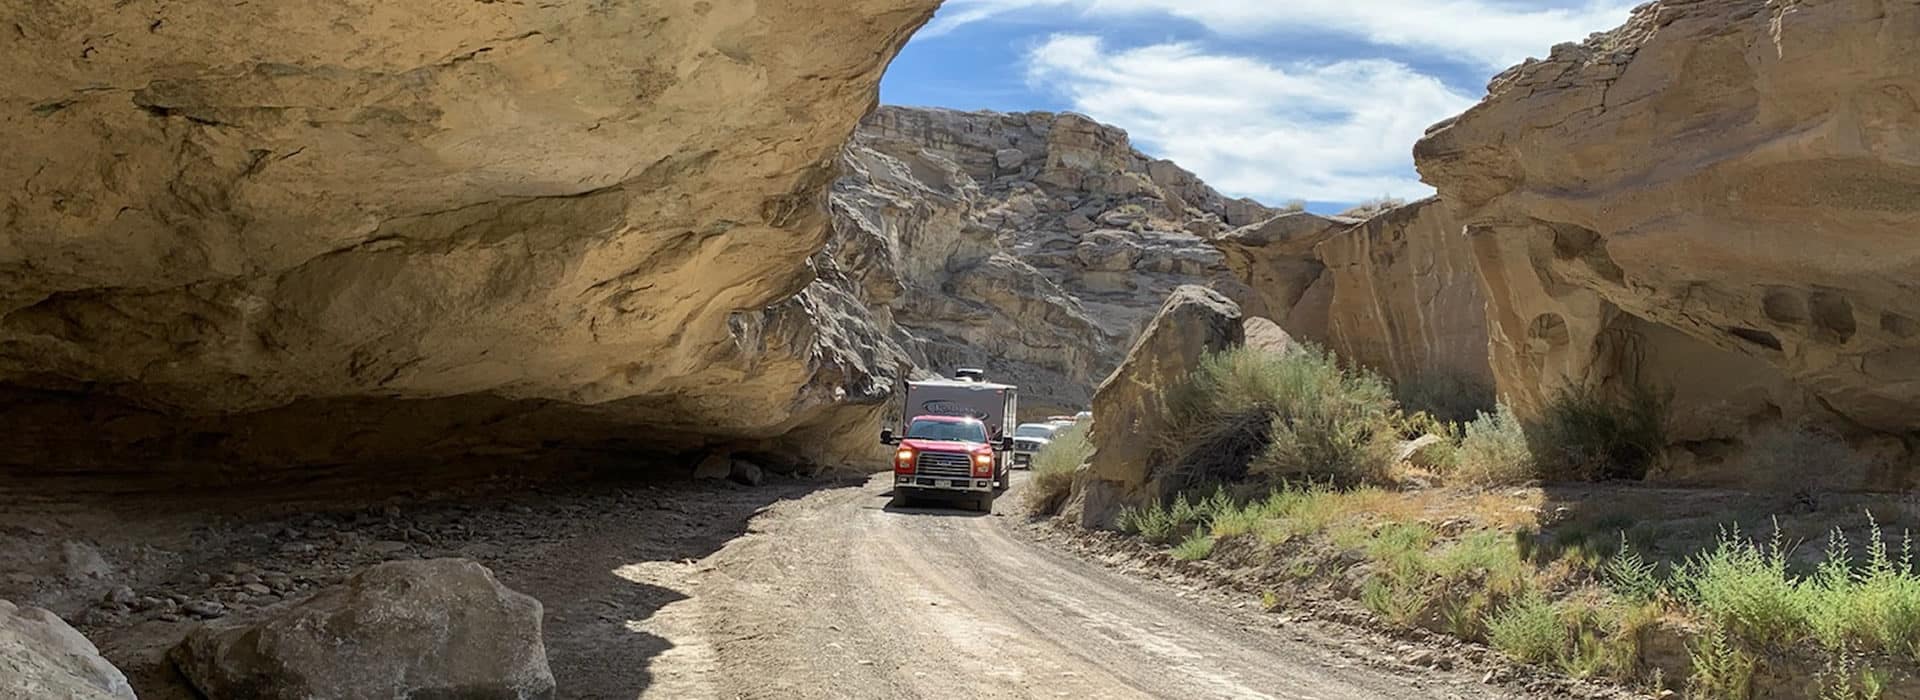 Truck and camper driving on Crosby Canyon Road under low hanging outcropping